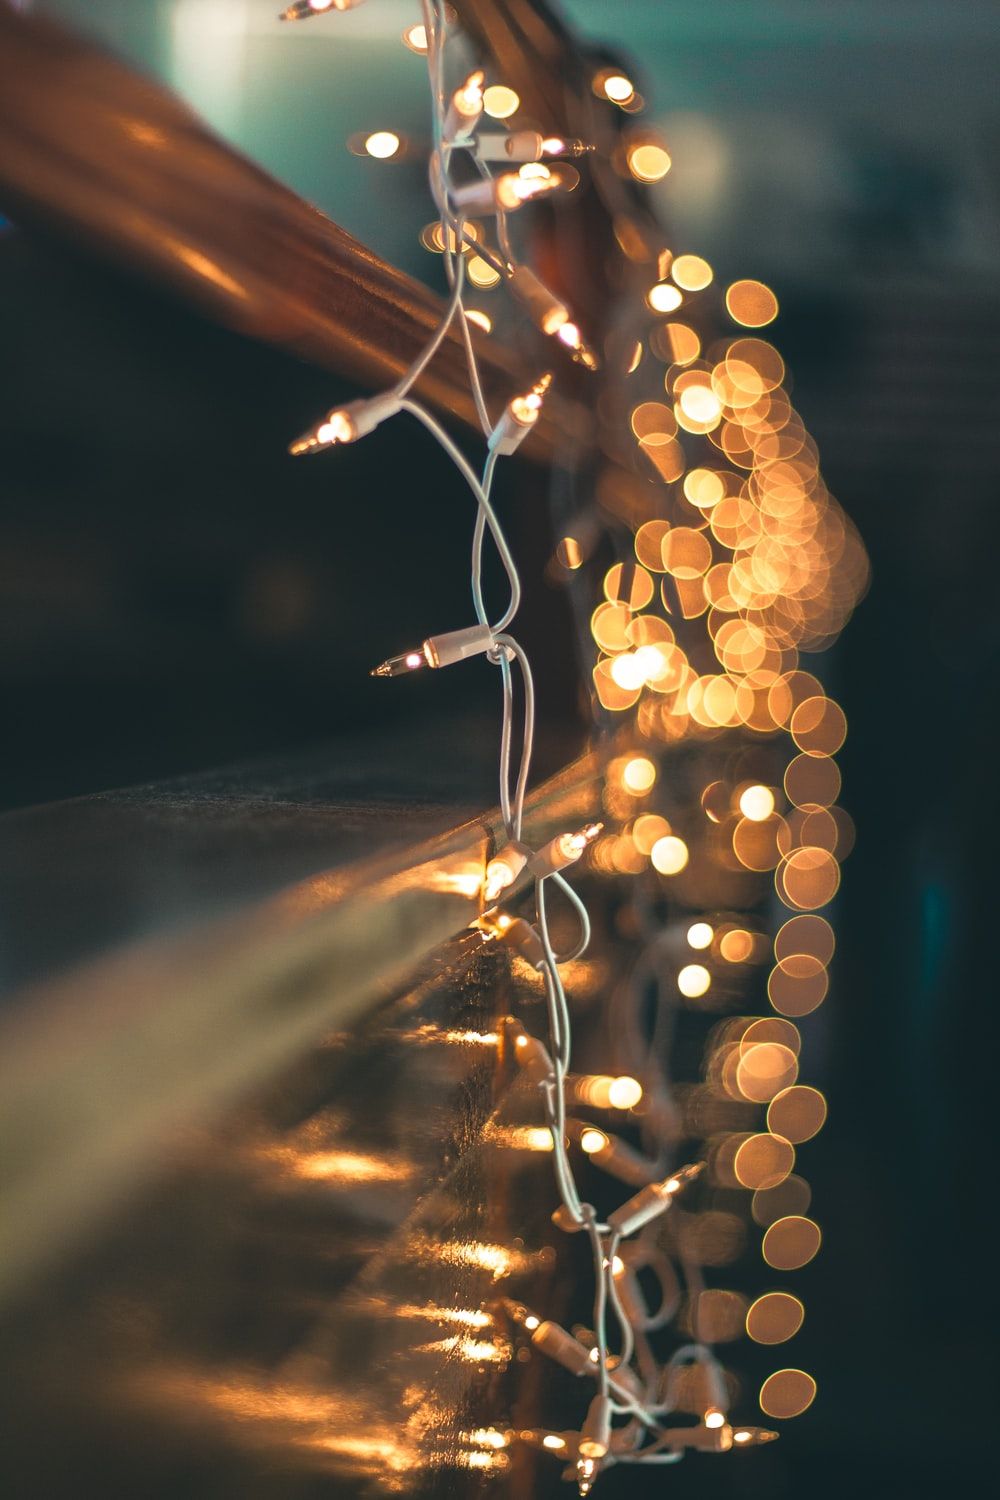 Blurry Lights Picture. Download Free Image